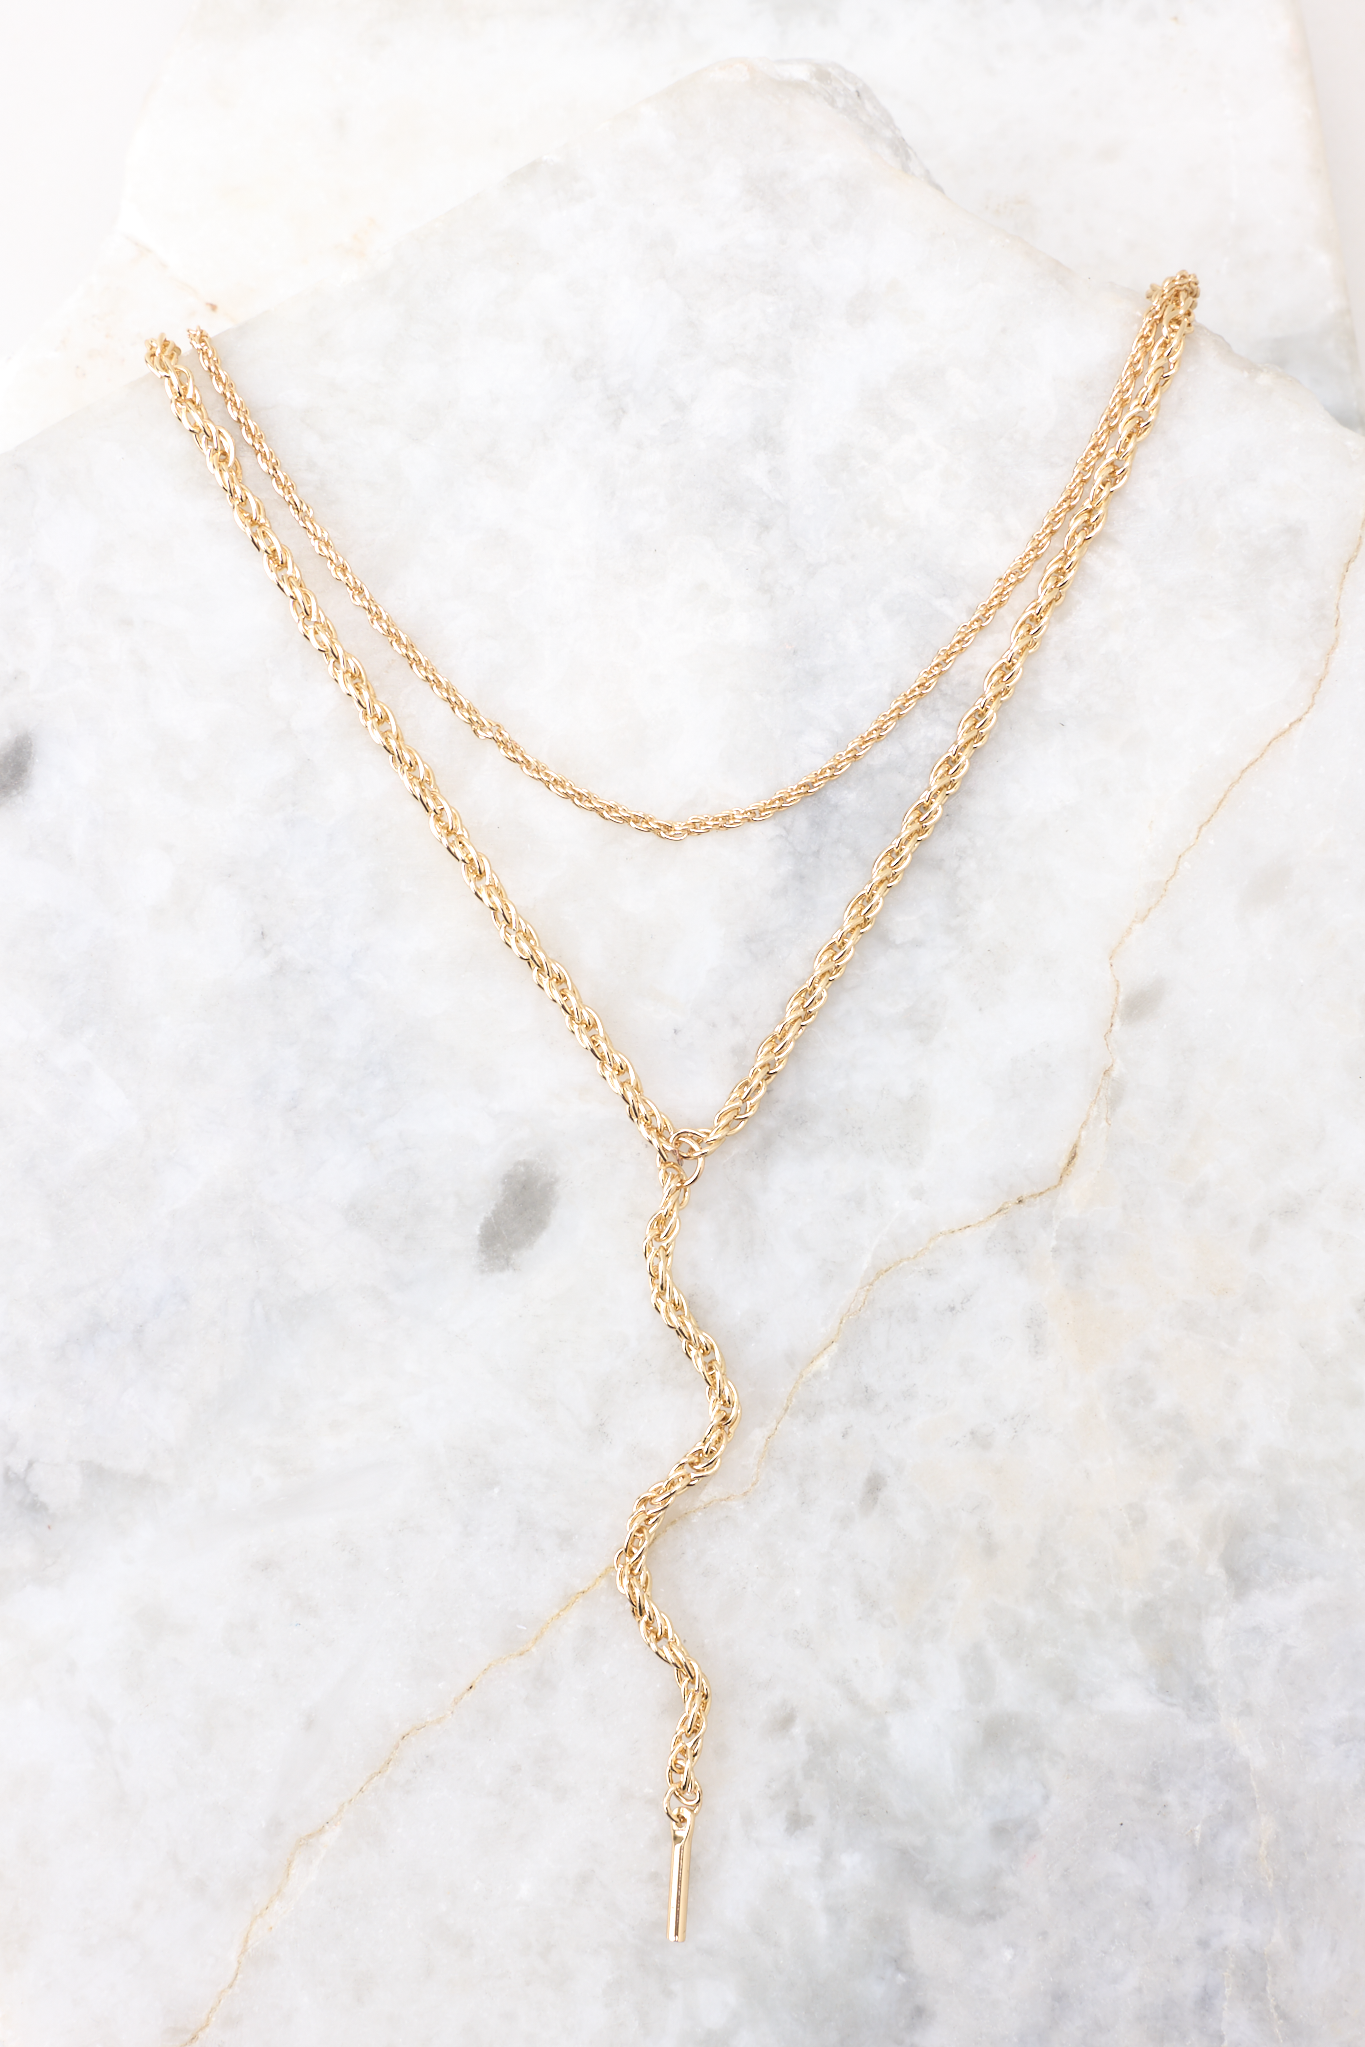 Close up of this necklace stack that features two gold chains with a simple linked design connected by a single lobster-claw clasp. This necklace stack measures 12